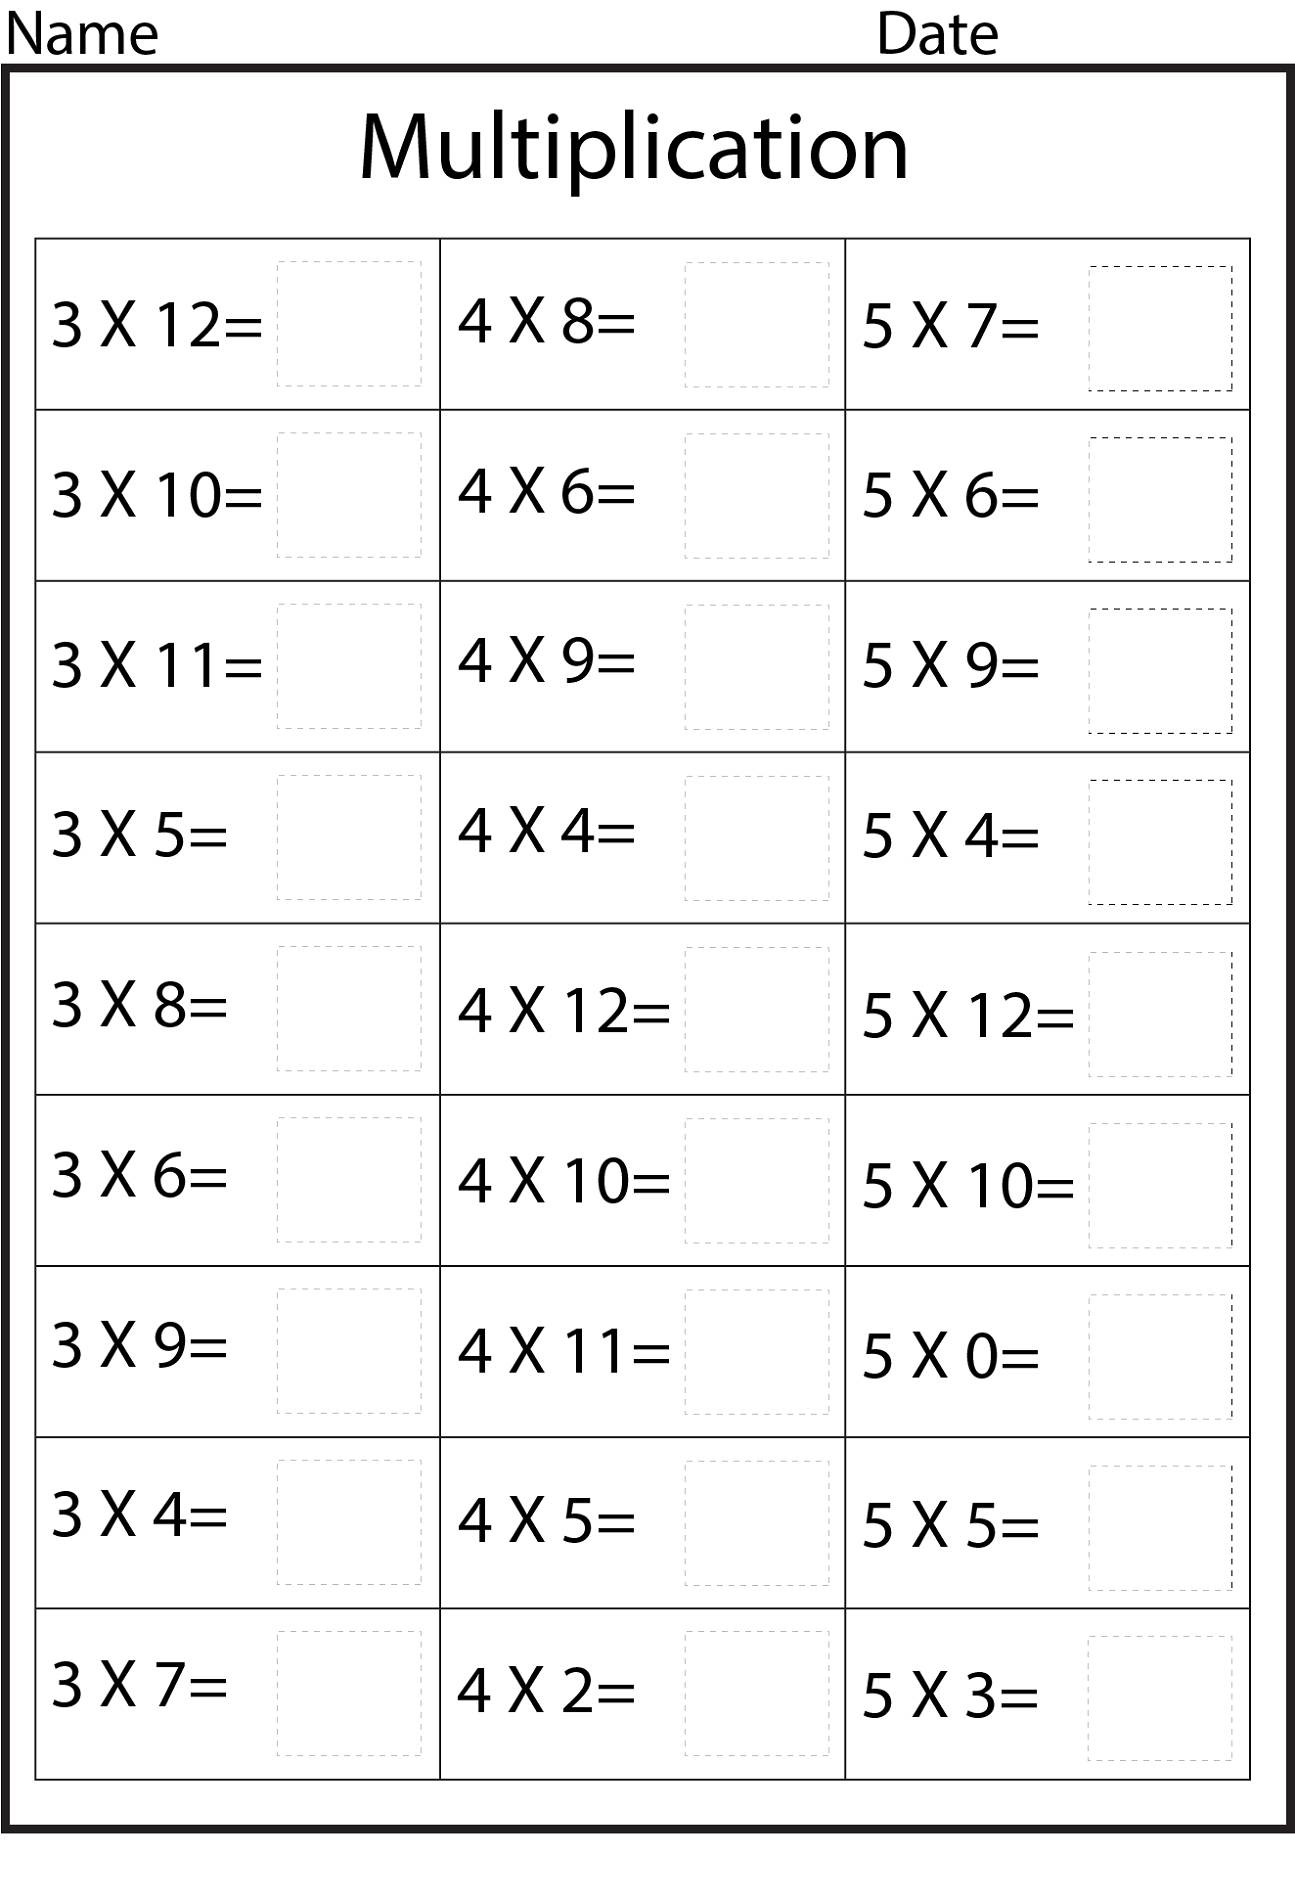 multiplication-worksheets-3-and-4-times-tables